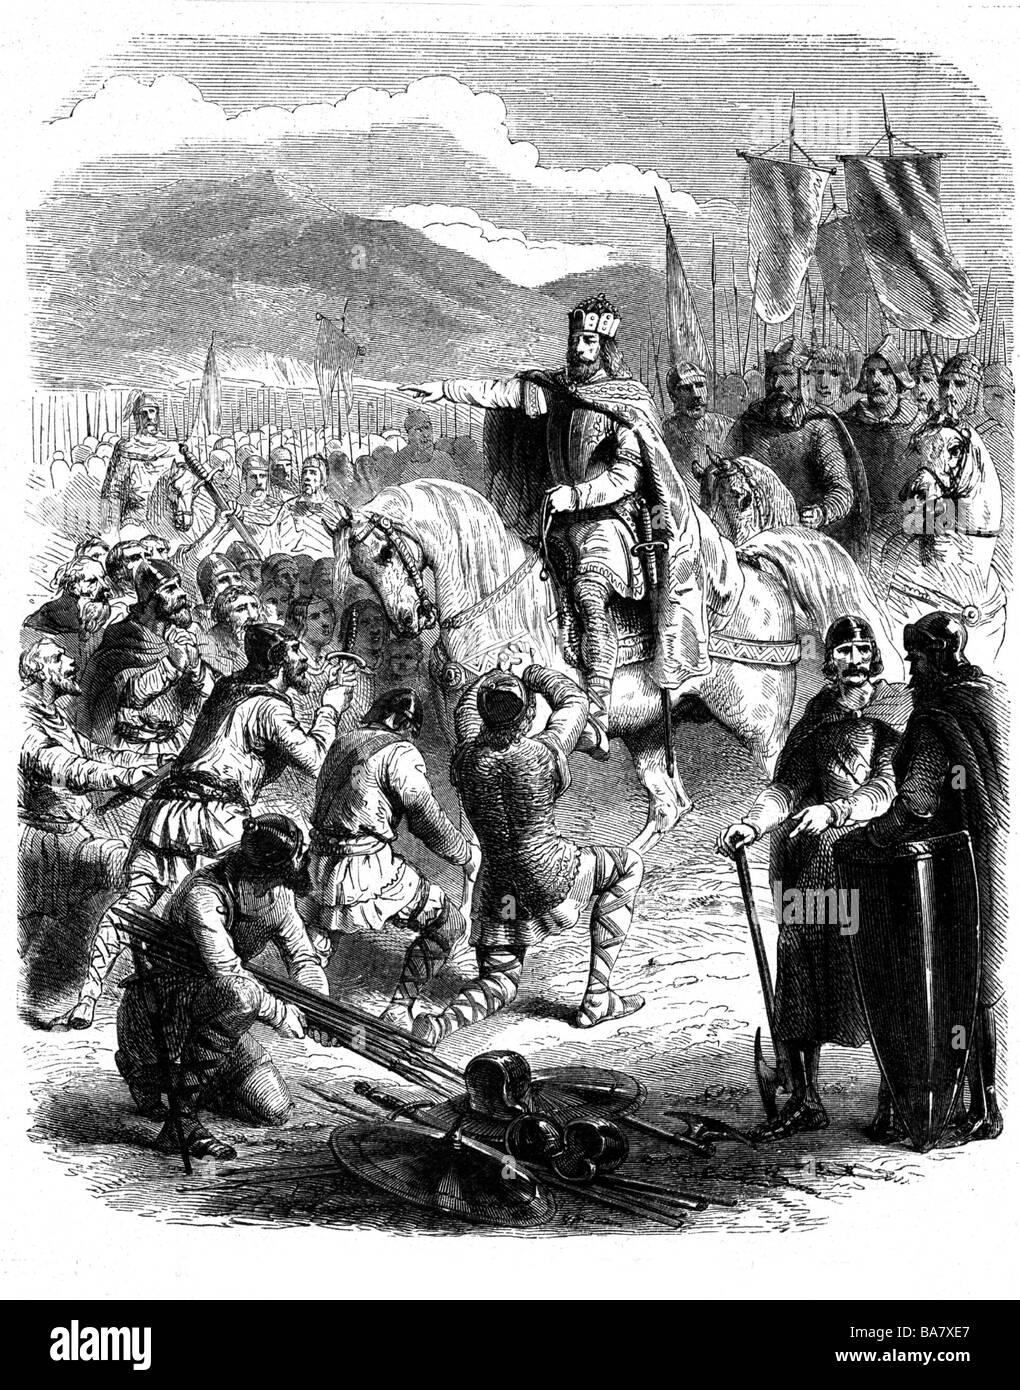 Charlemagne, 2.4.742 - 28.1.814, Roman Emperor 800 - 814, King of the Franks 768 - 814, Saxons submitting to him, wood engraving, 19th century, Stock Photo